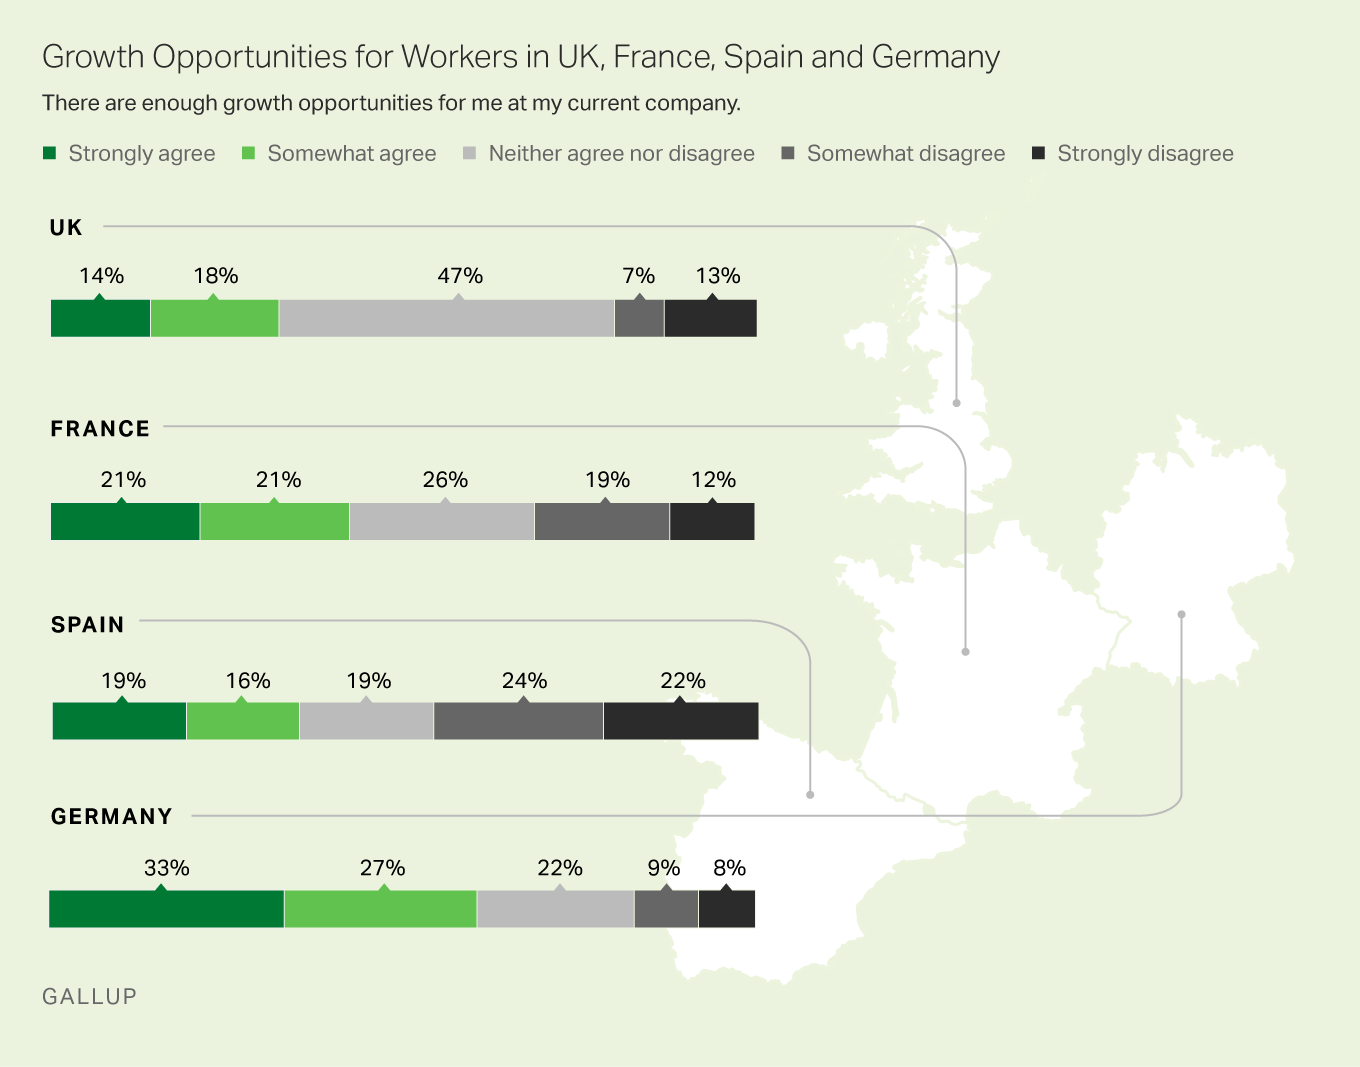 Growth opportunities for workers in UK, France, Spain and Germany.